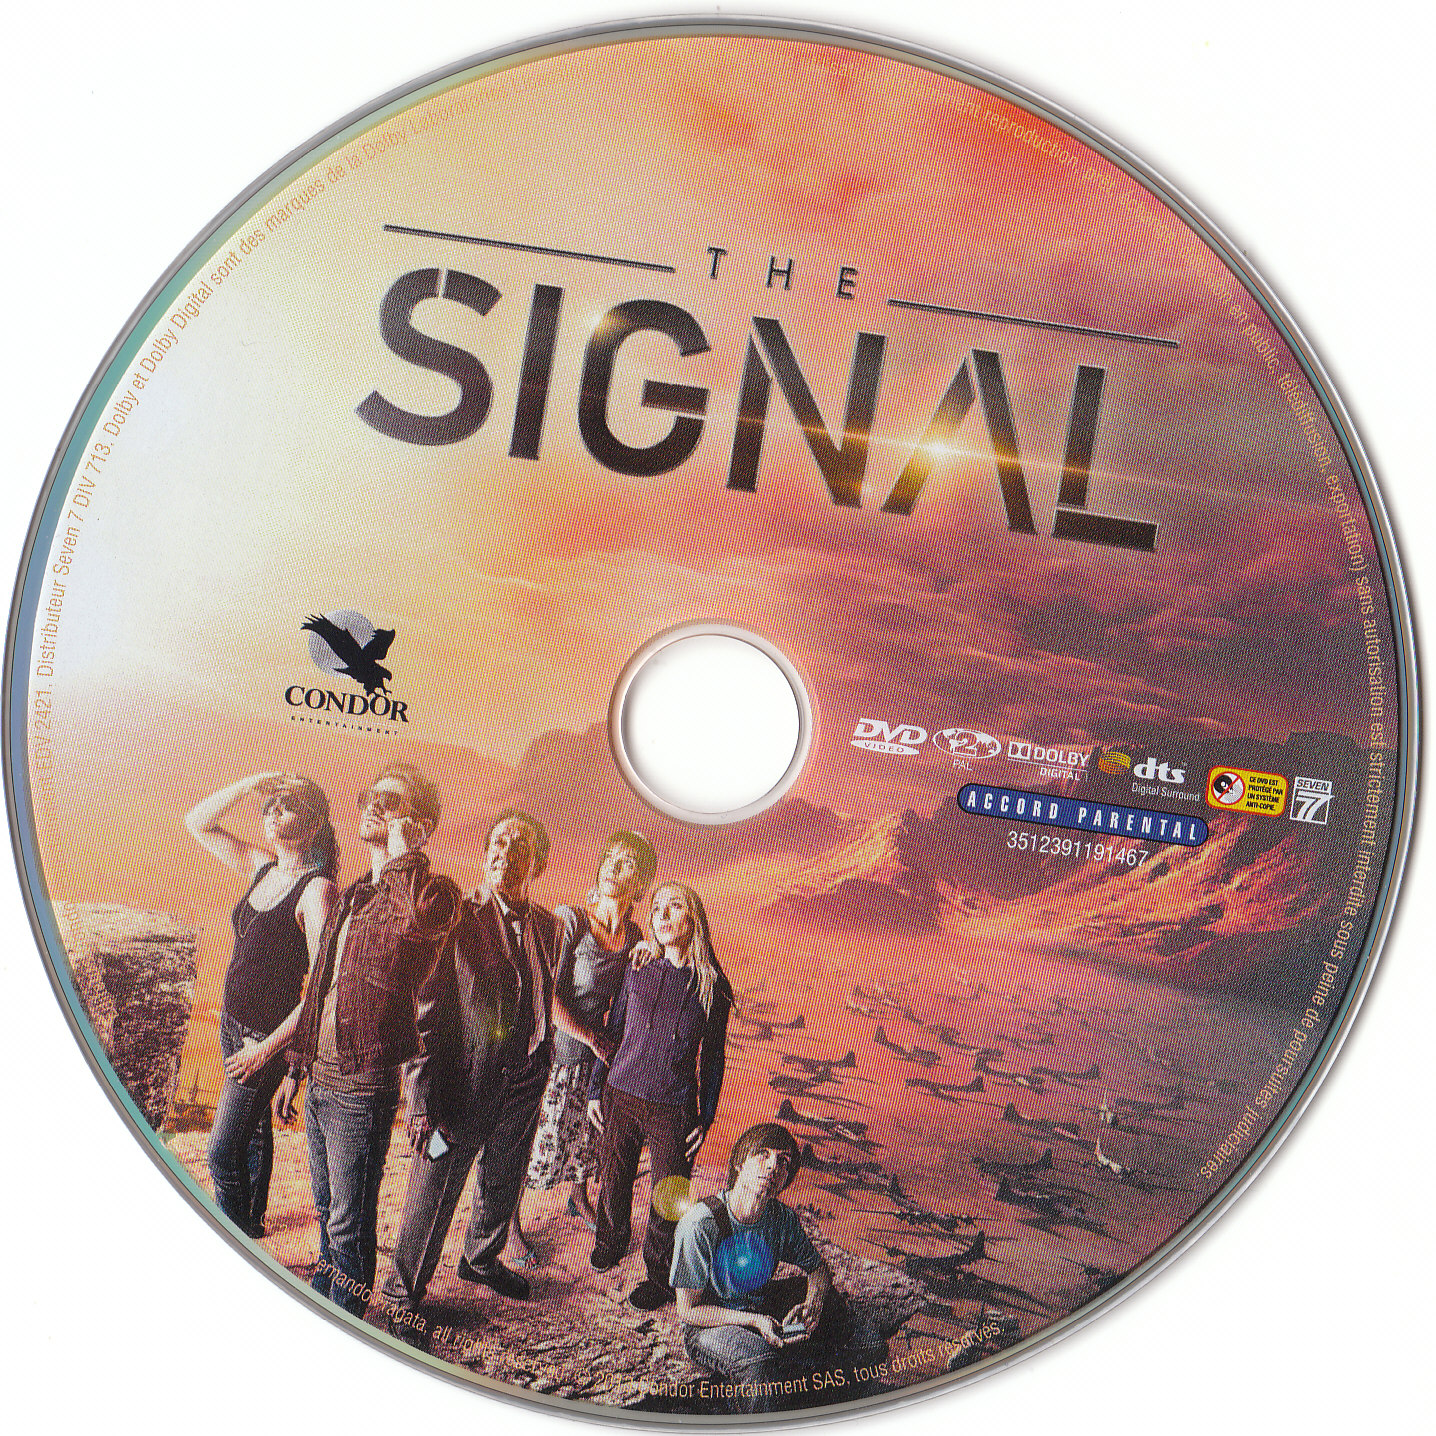 The signal (2010)